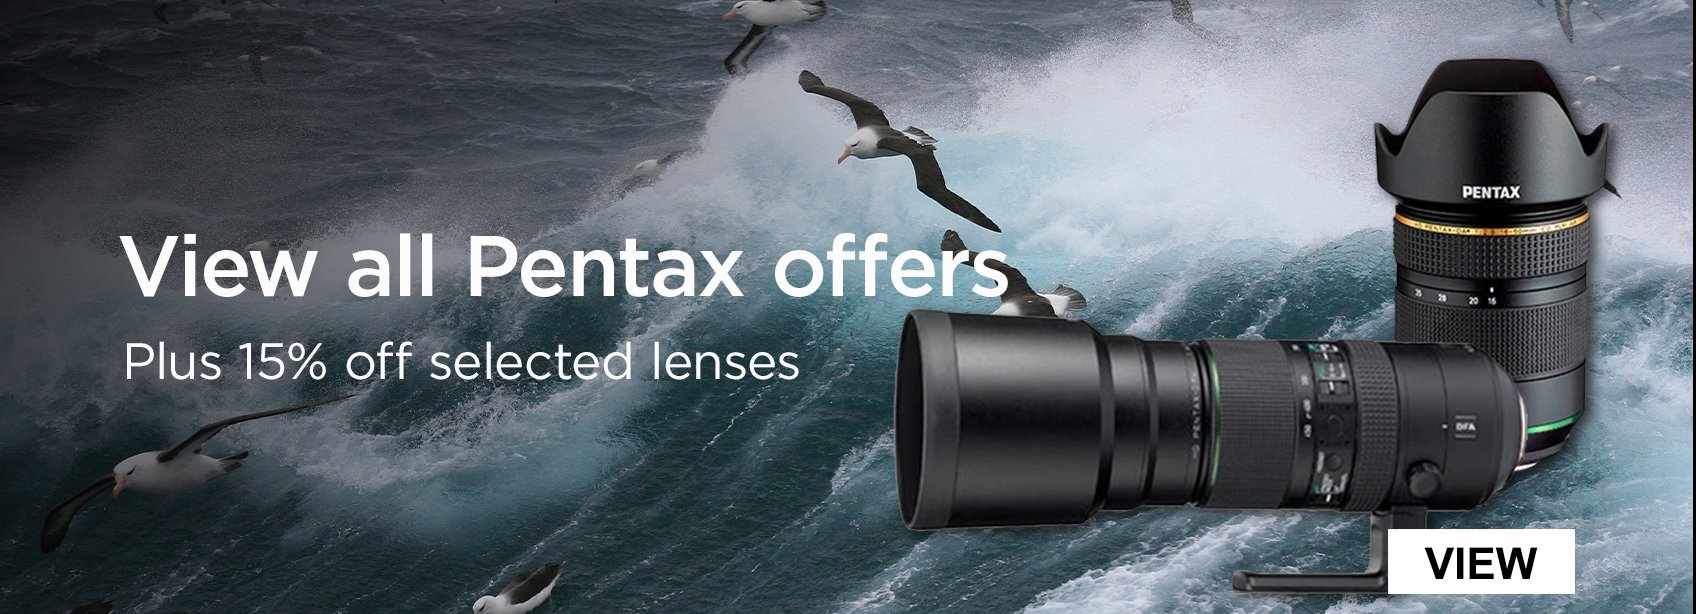 View all Pentax offers. 15% off selected lenses